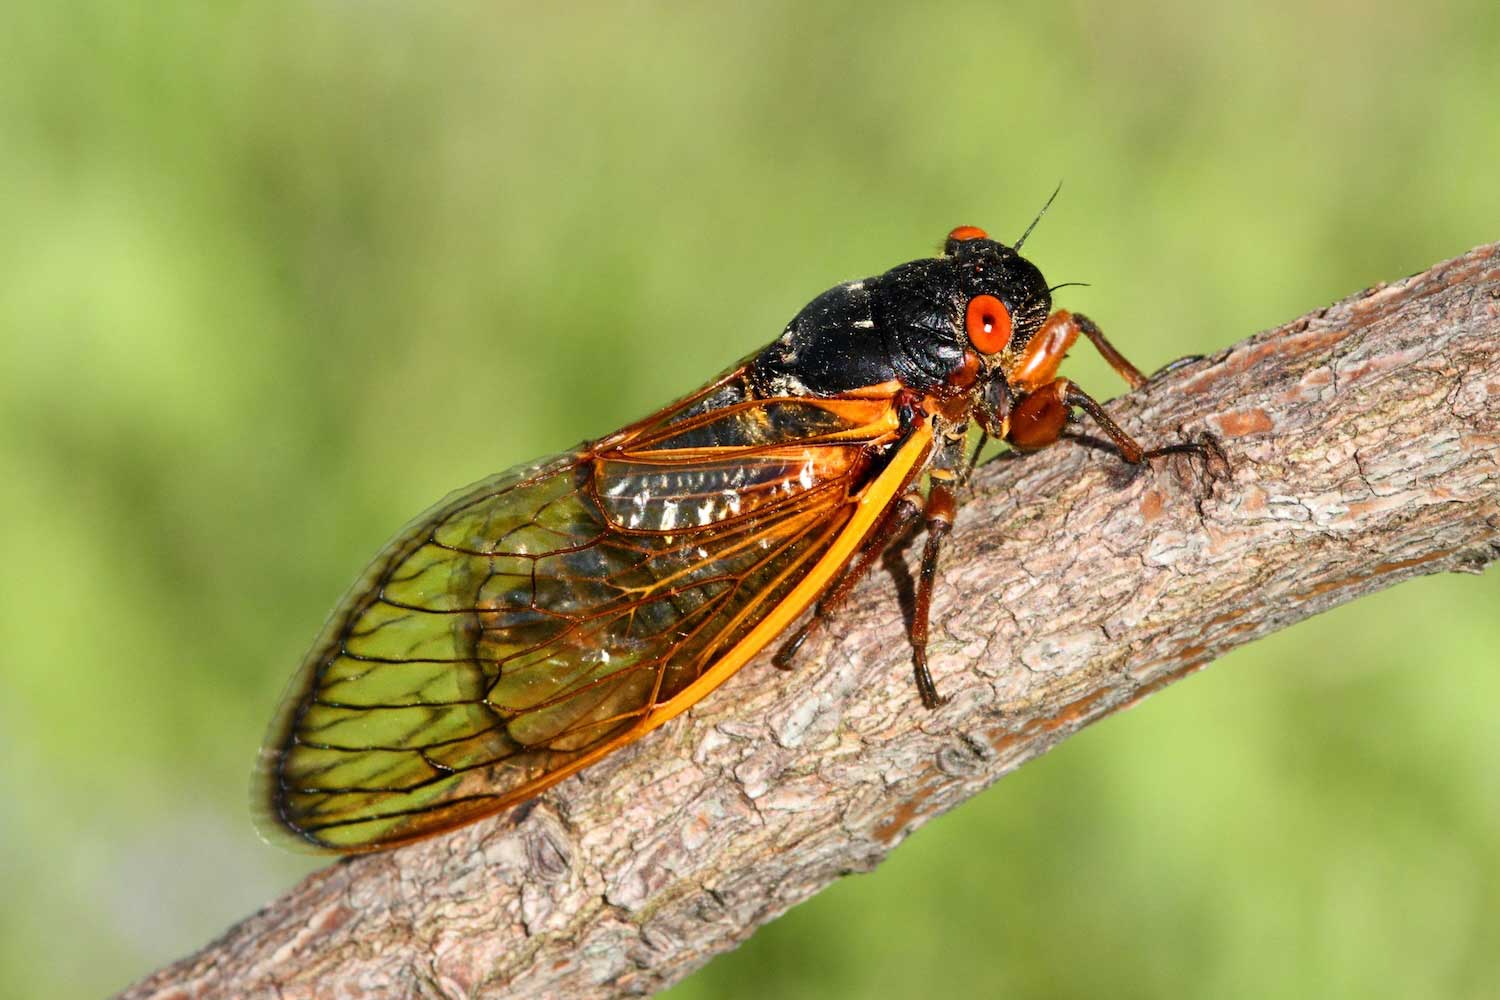 A periodical cicada on a tree branch.